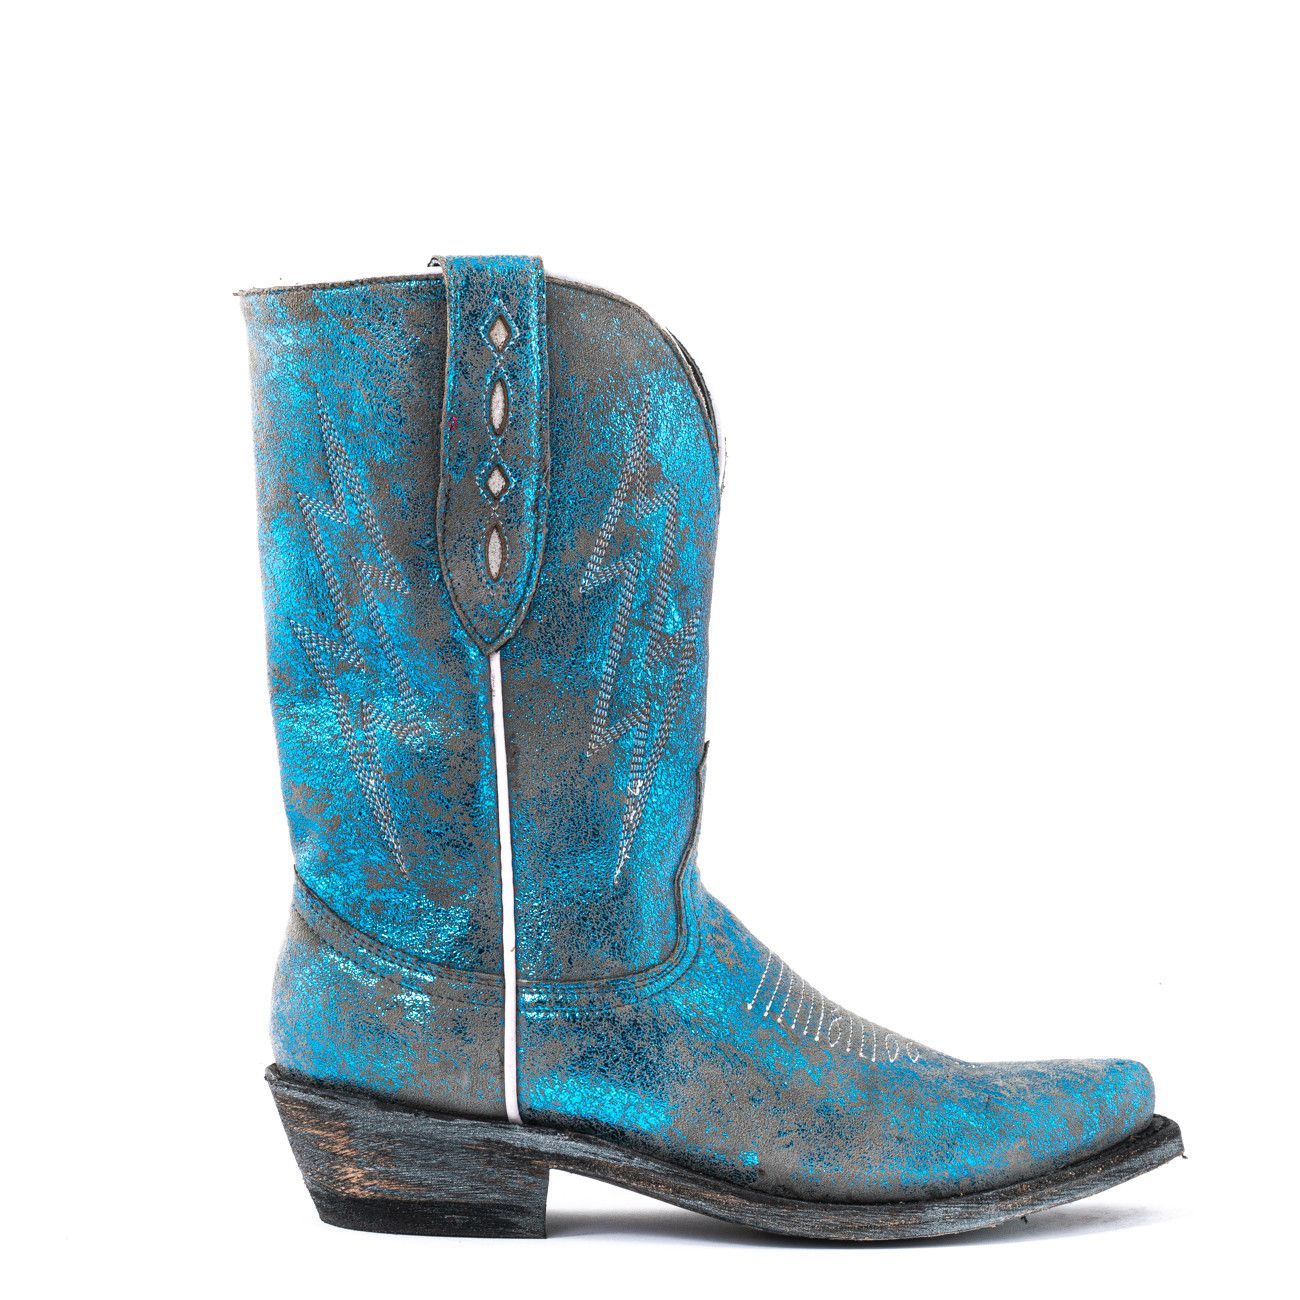 VICTORIA ORBIT BLUE                     THIS STYLE RUNS SMALL, ORDER 1 SIZE UP THAN YOUR USUAL SIZE              ANKLE BOOTS WIT